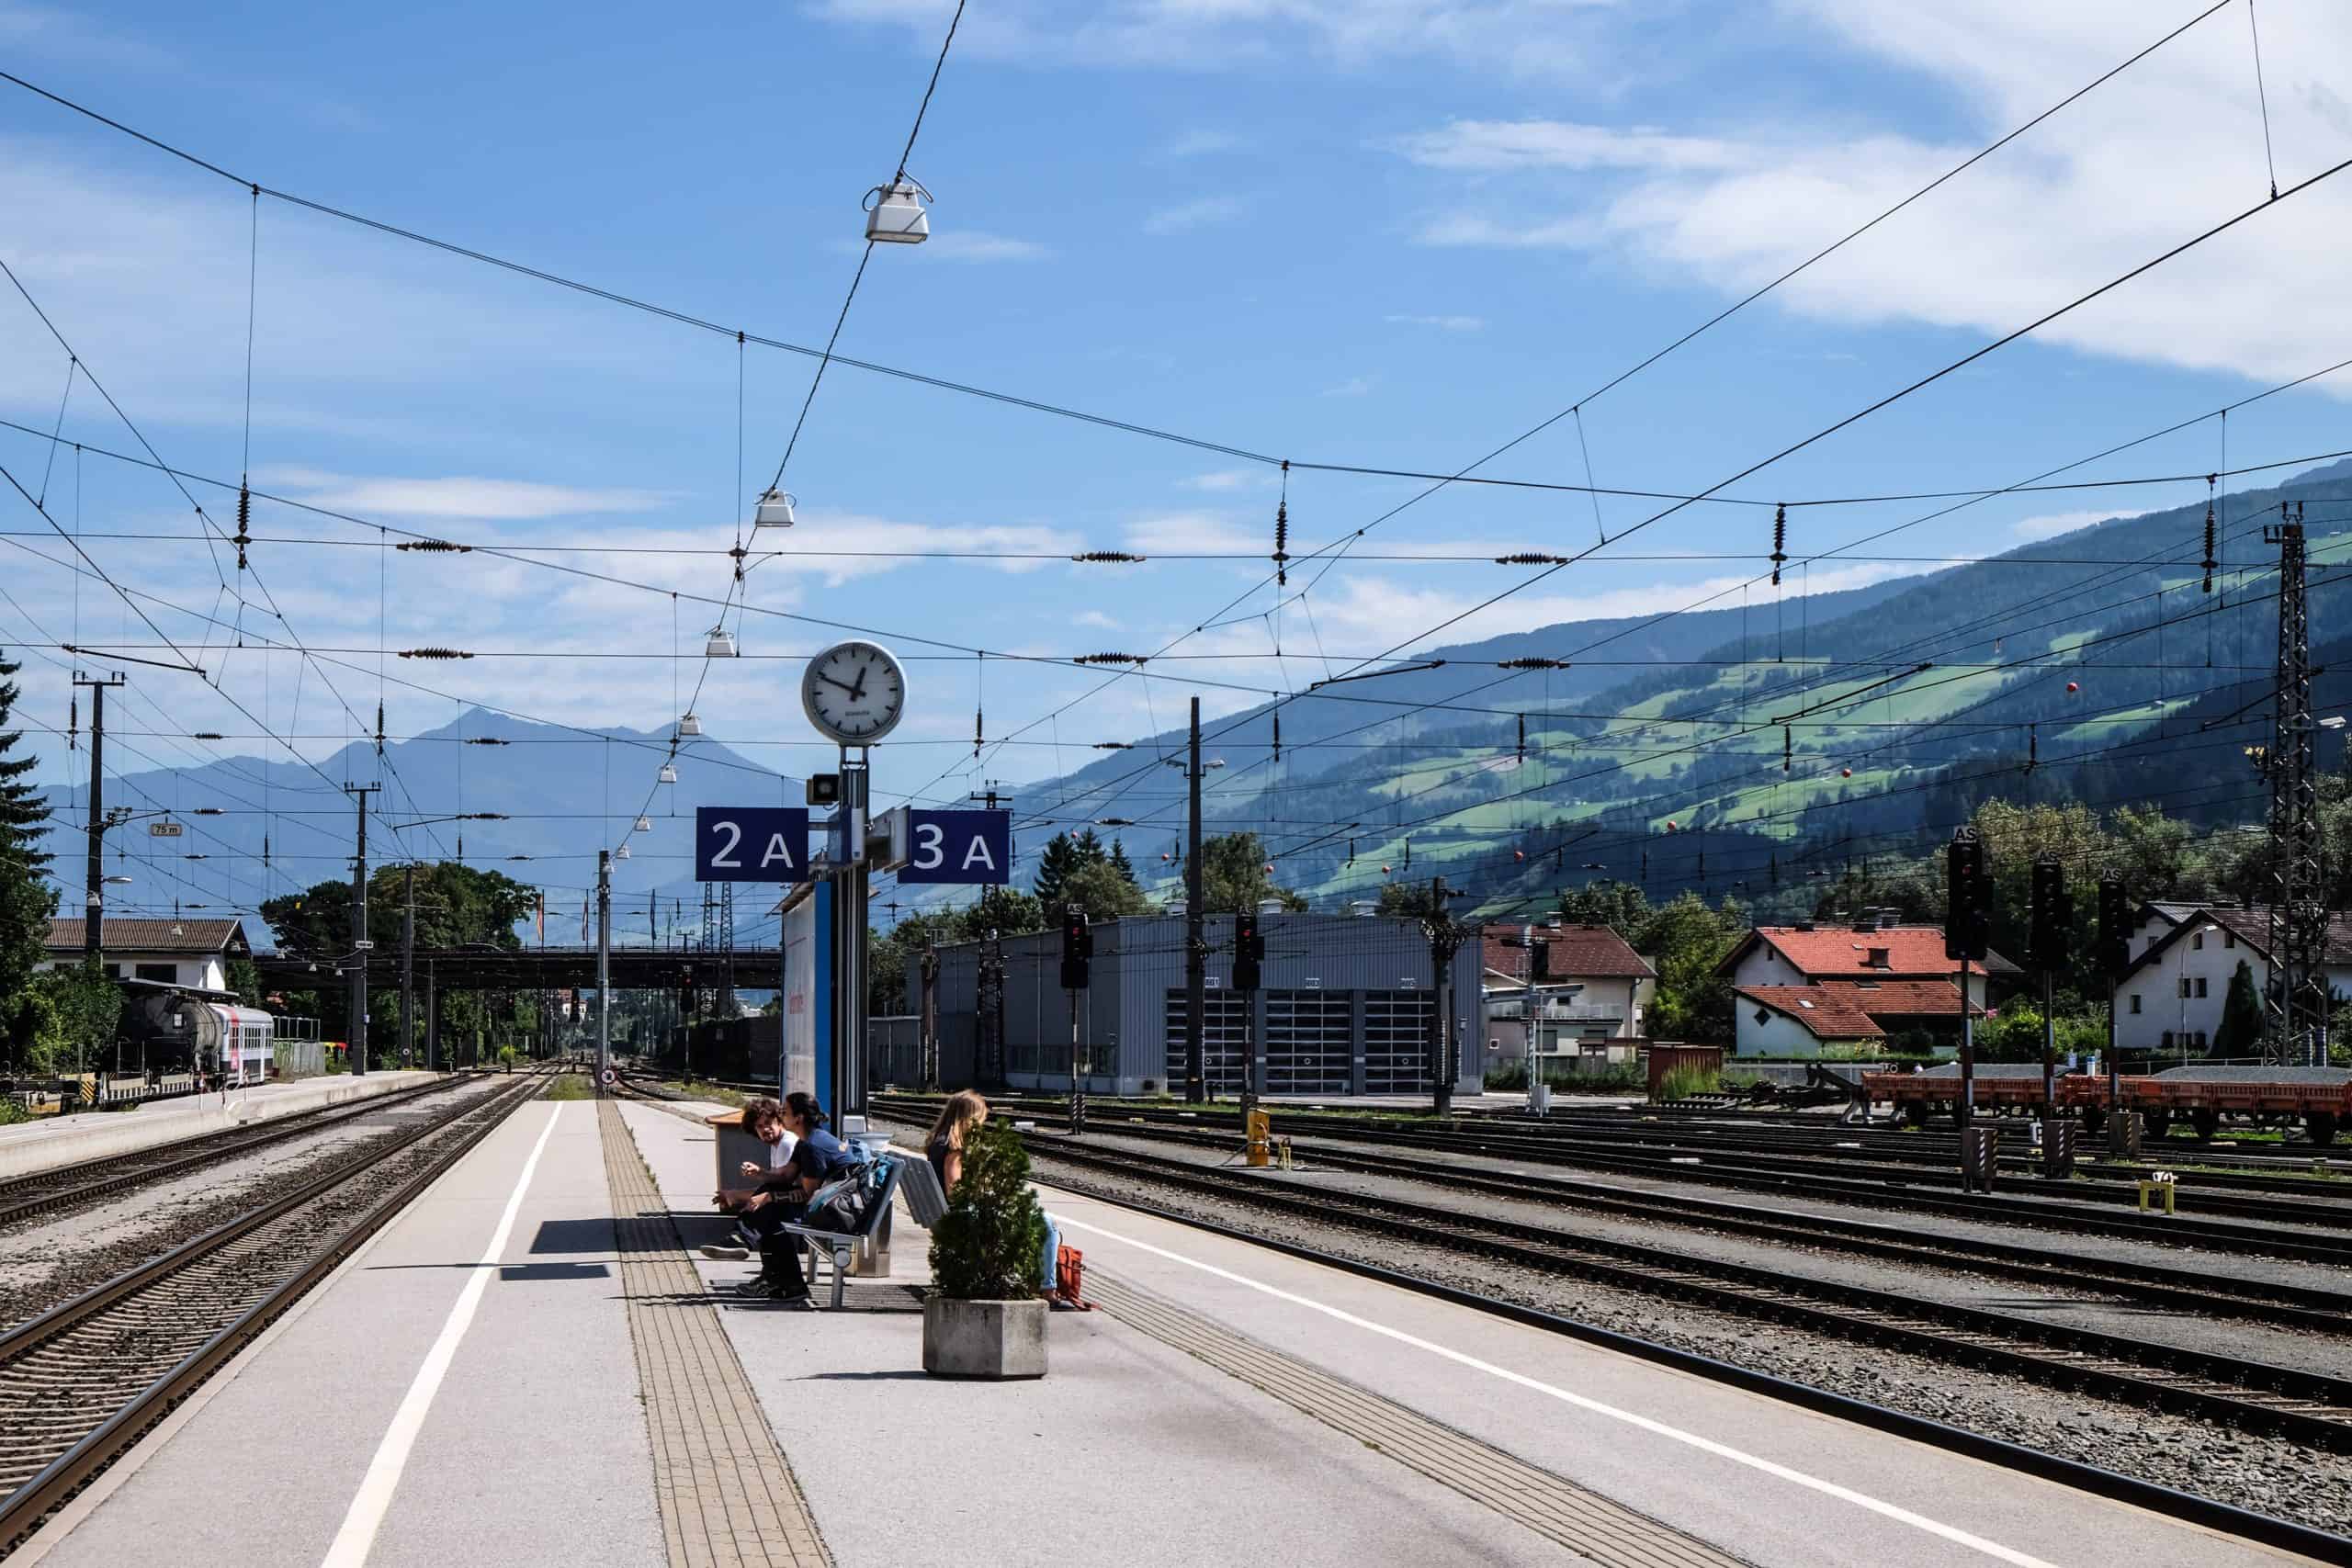 People sitting and waiting on a railway station platform at Innsbruck train station in Austria